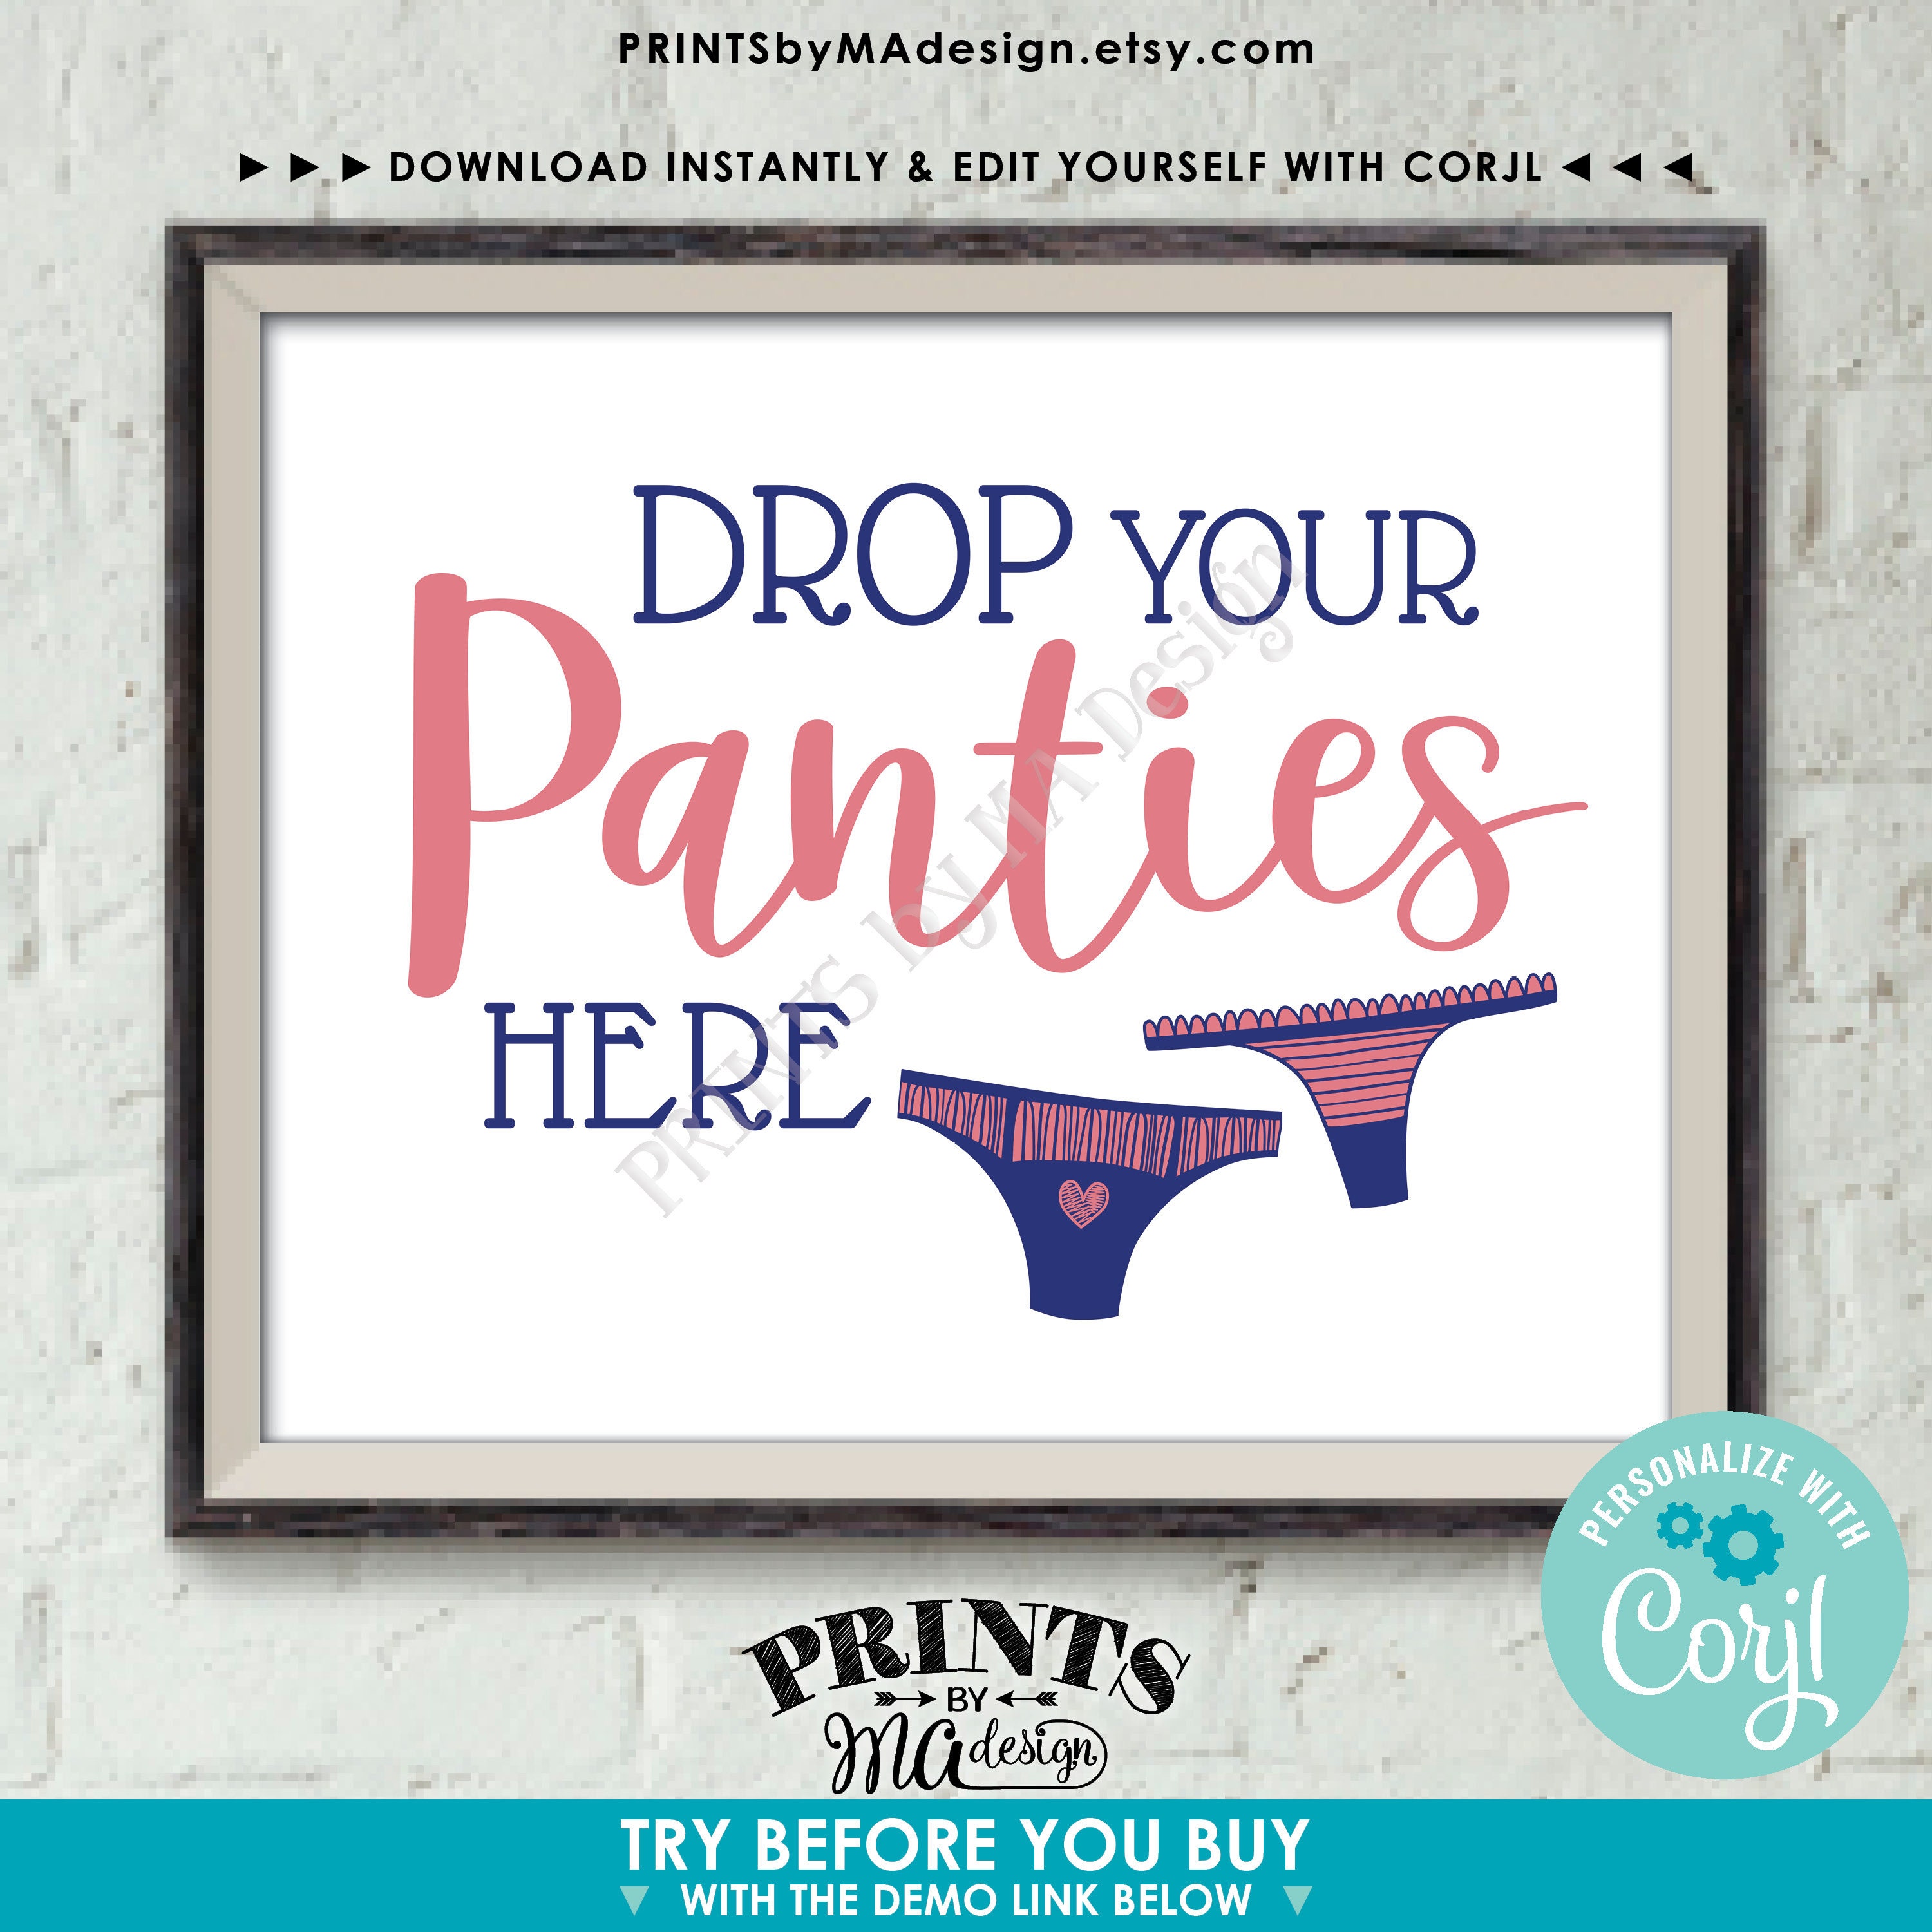 Drop Panties Here Panty Game, Bridal Shower, Bachelorette Party Game Idea,  DIY PRINTABLE 8x10/16x20” Sign